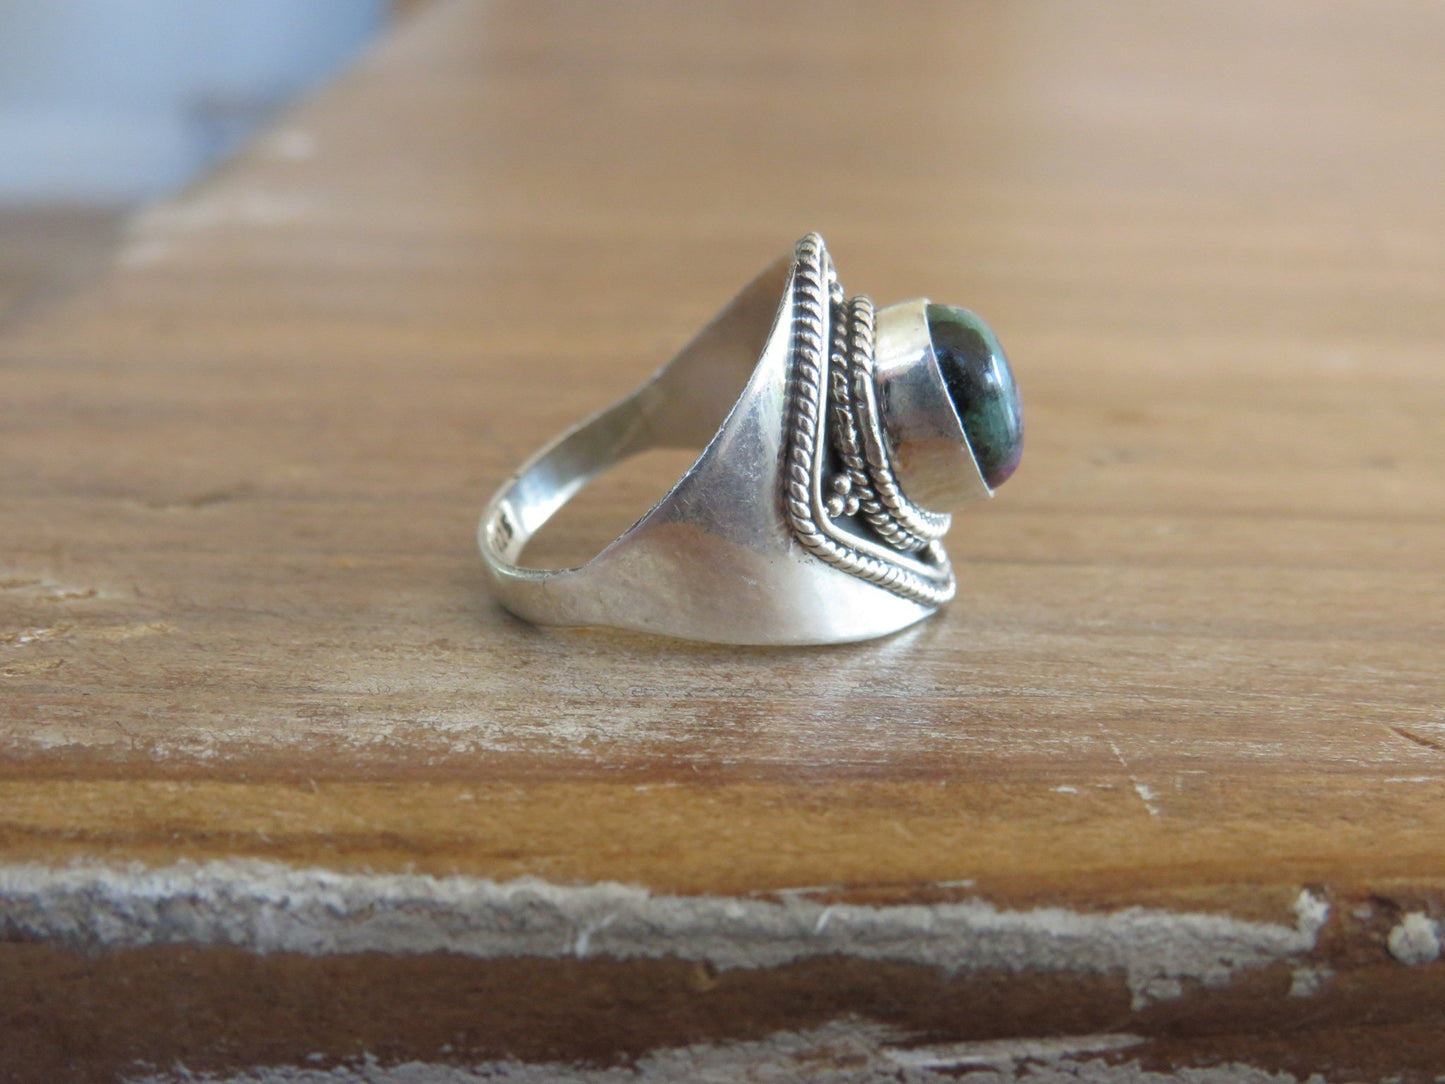 Ruby in Zoisite Silver Ring